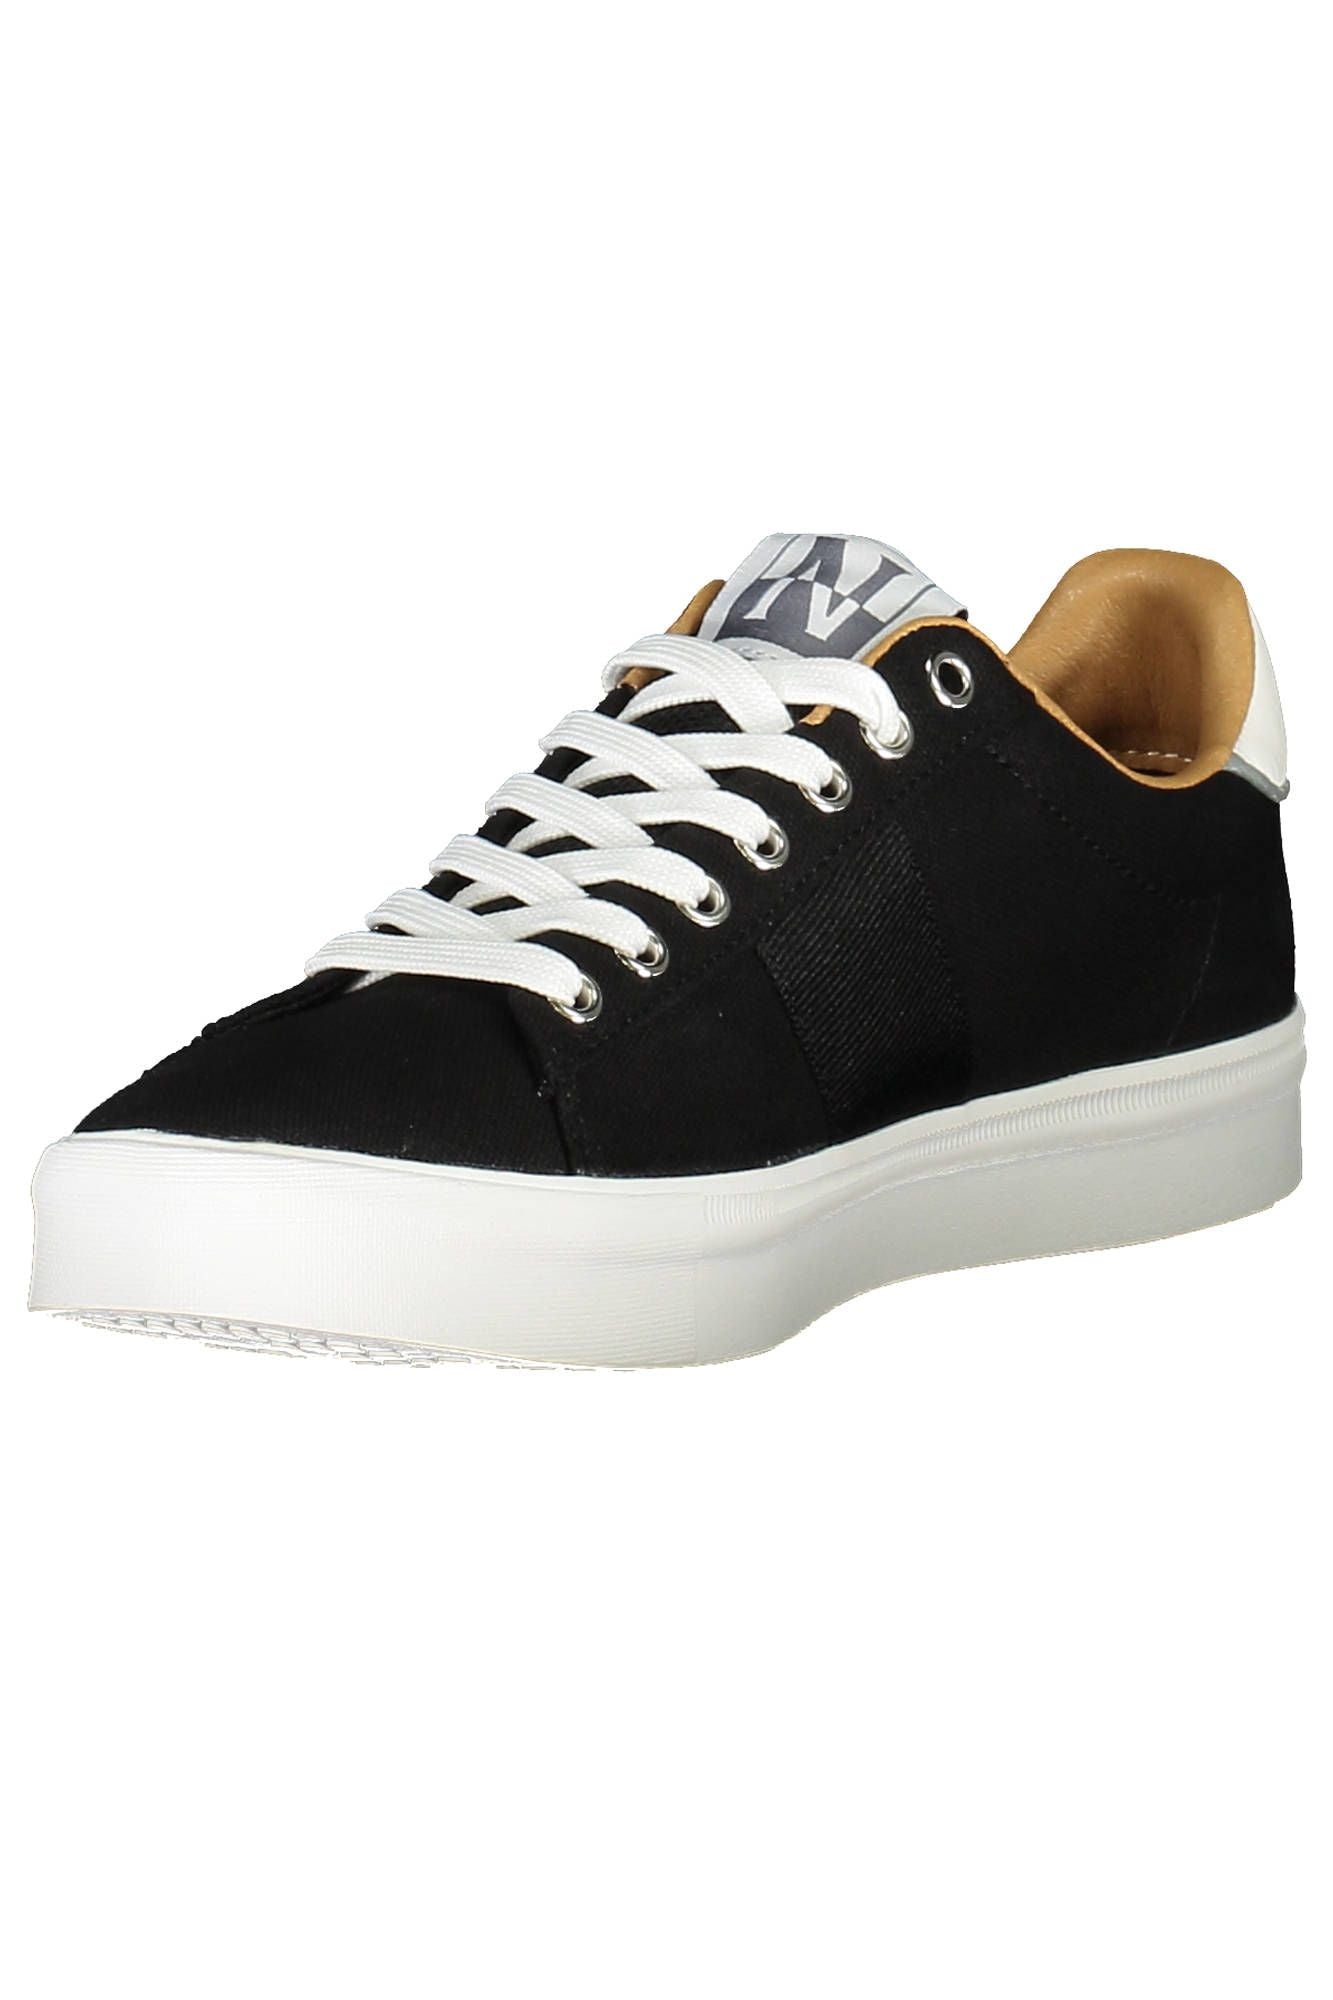 Black Lace-Up Sneakers with Contrasting Accents